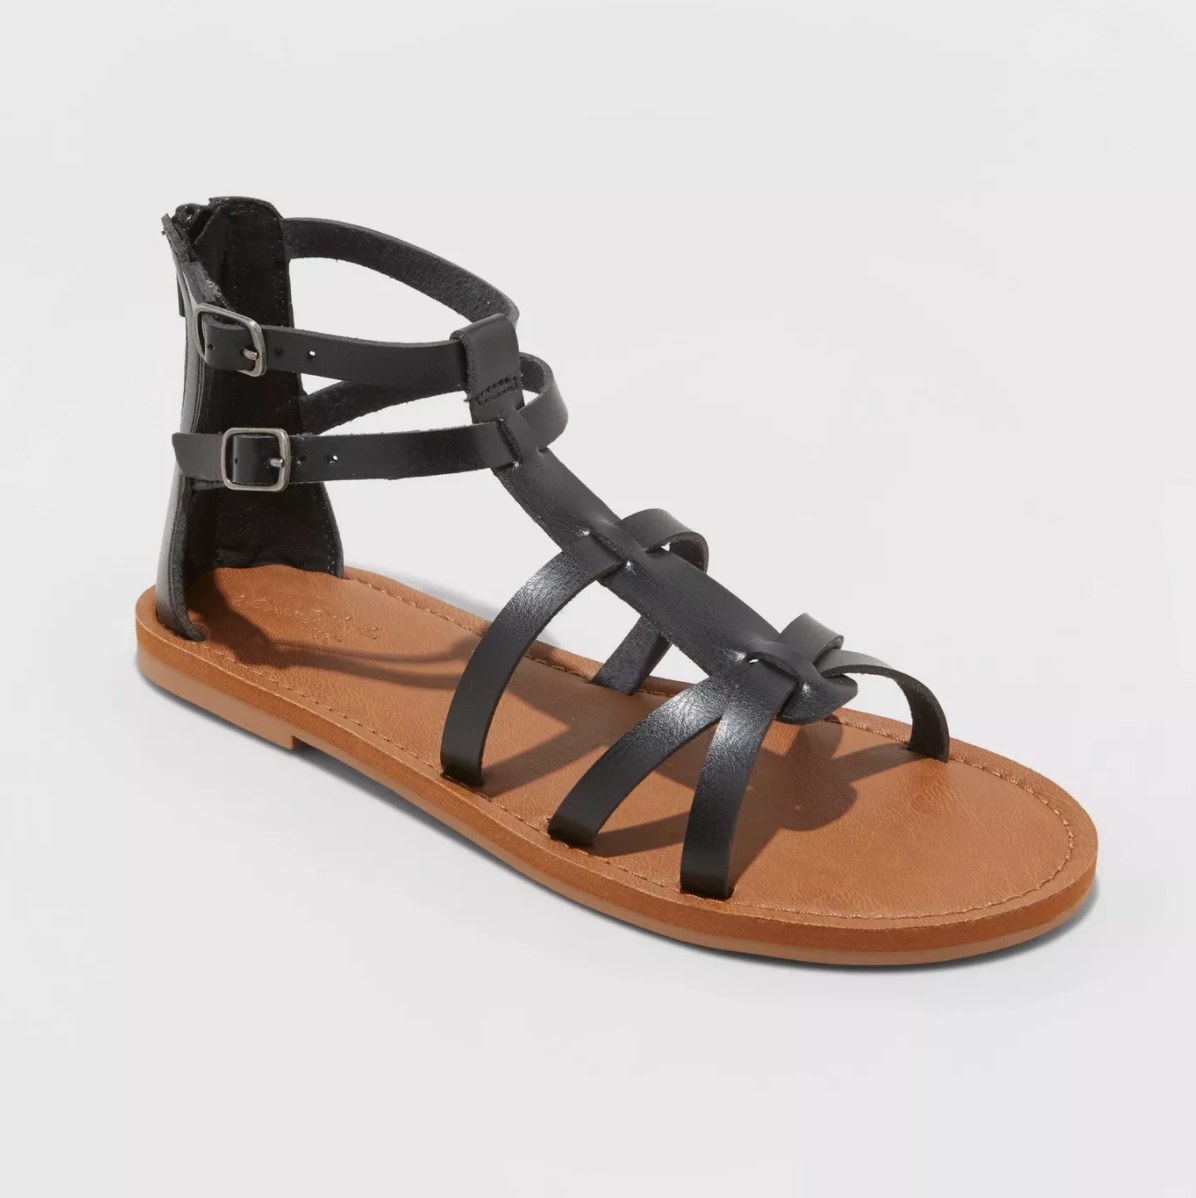 the black strappy sandals